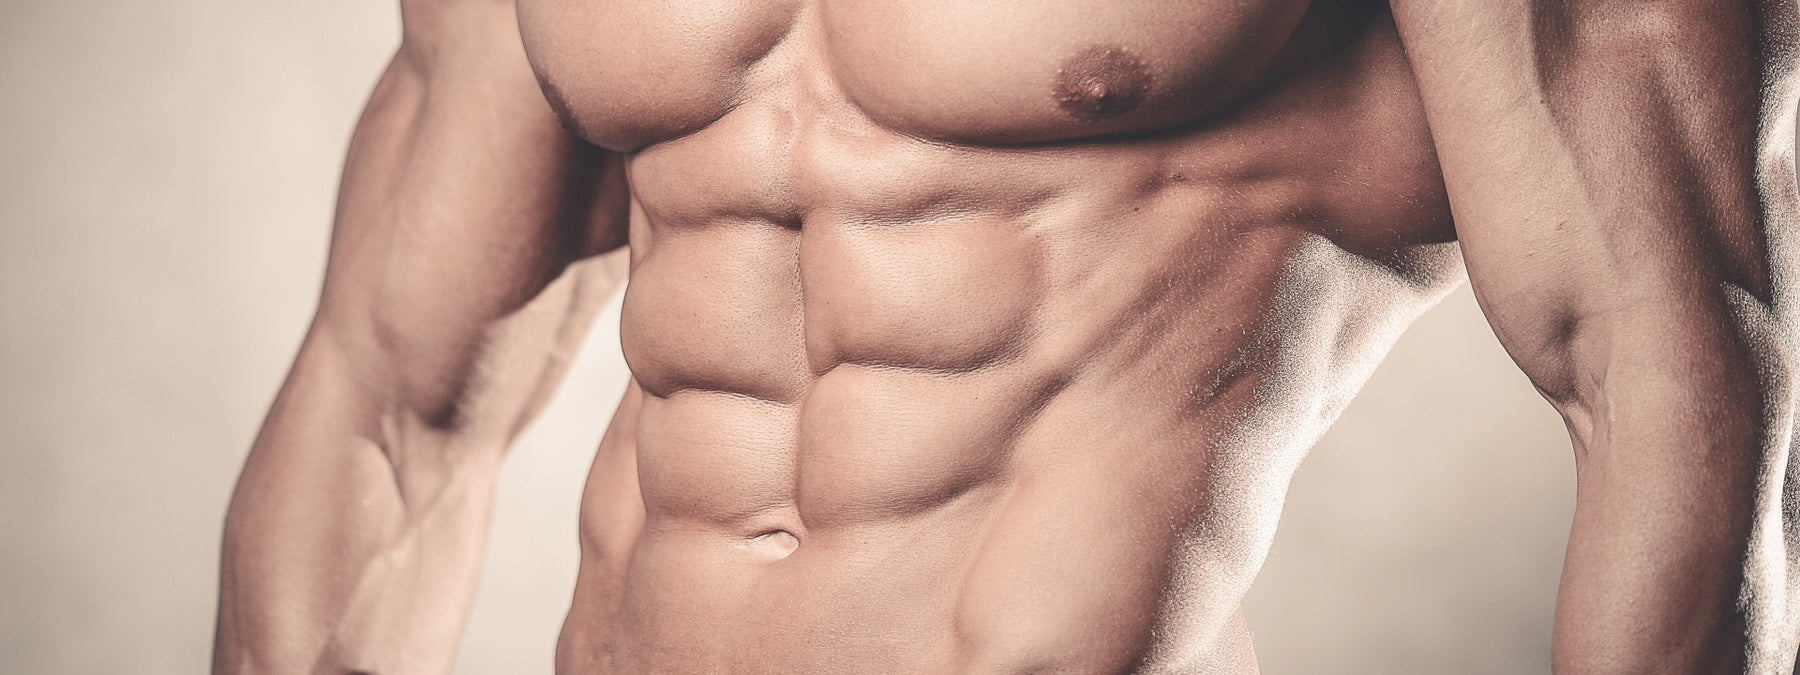 How to Get Shredded and Stay That Way 24/7/365